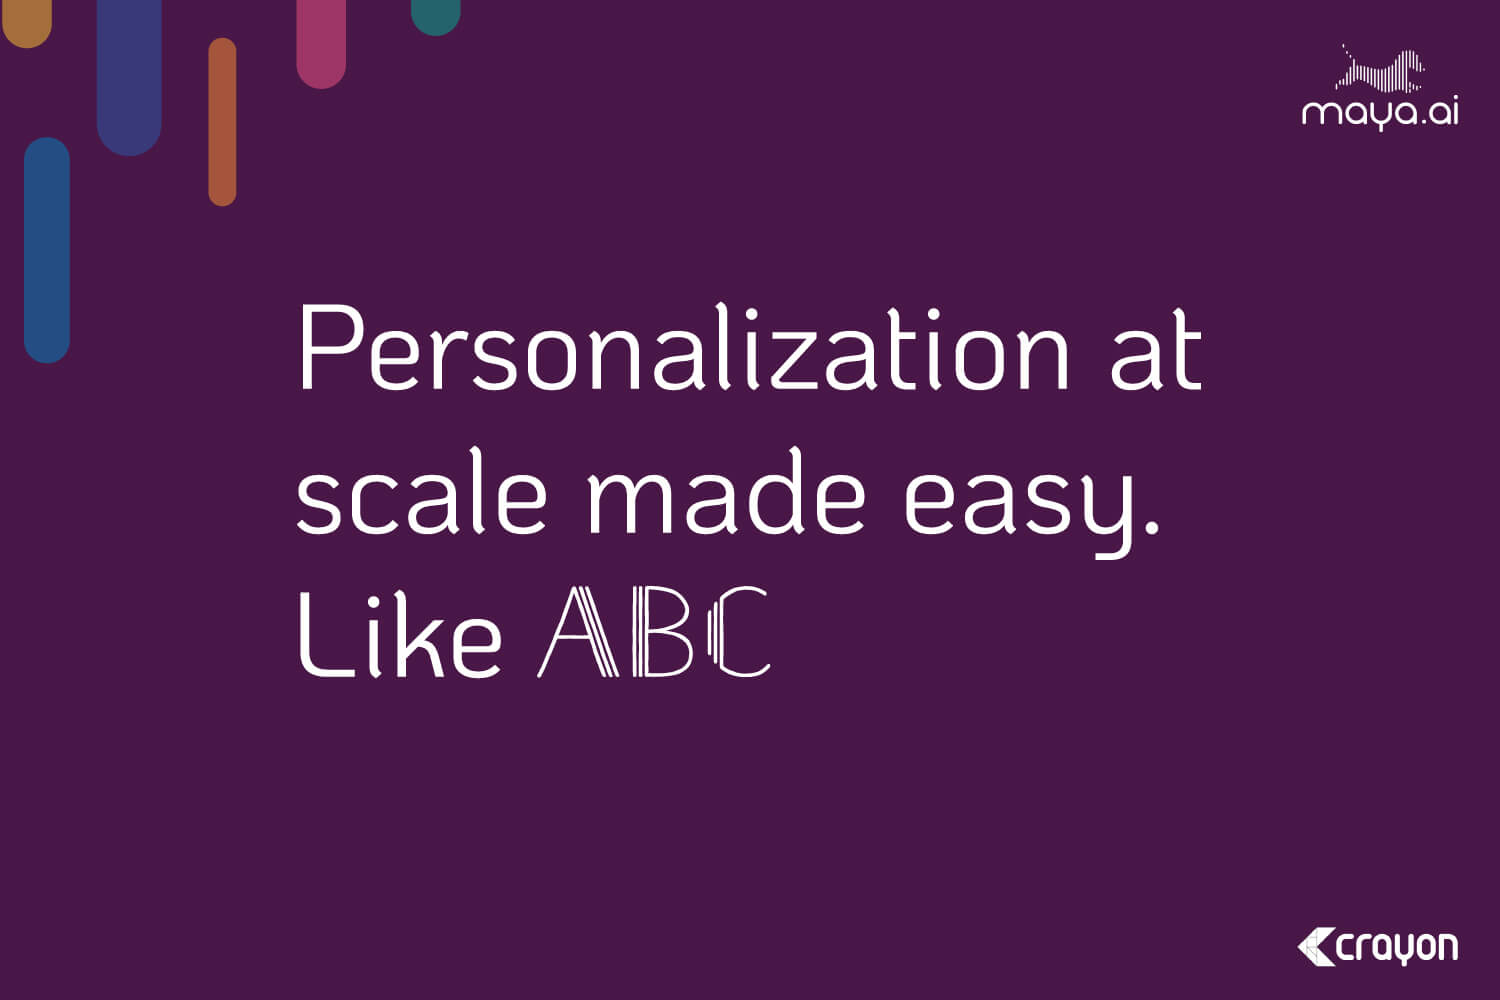 Personalization at scale made easy. Like ABC